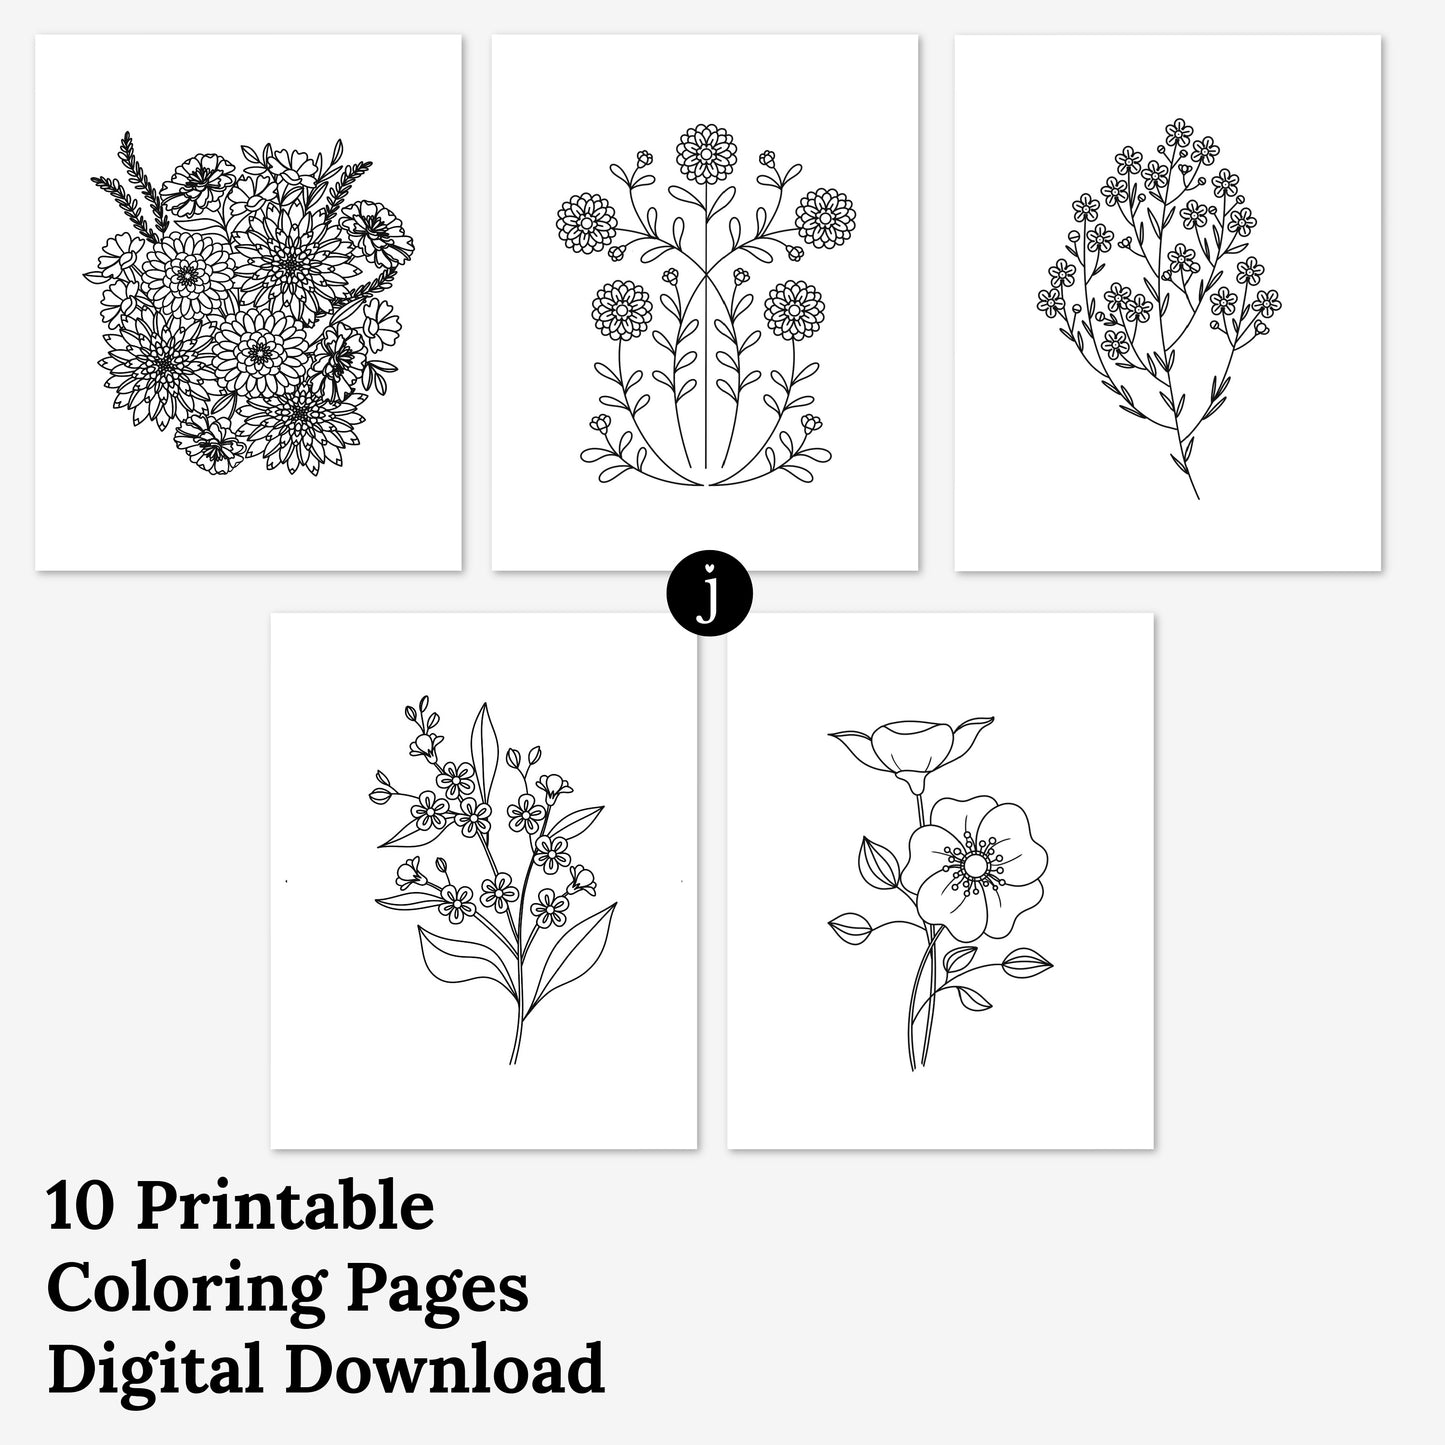 10 Pk Coloring Pages | Floral No. 3 Coloring Book Illustrations | Mindful Printable Coloring Sheets | Calming Nature Doodles